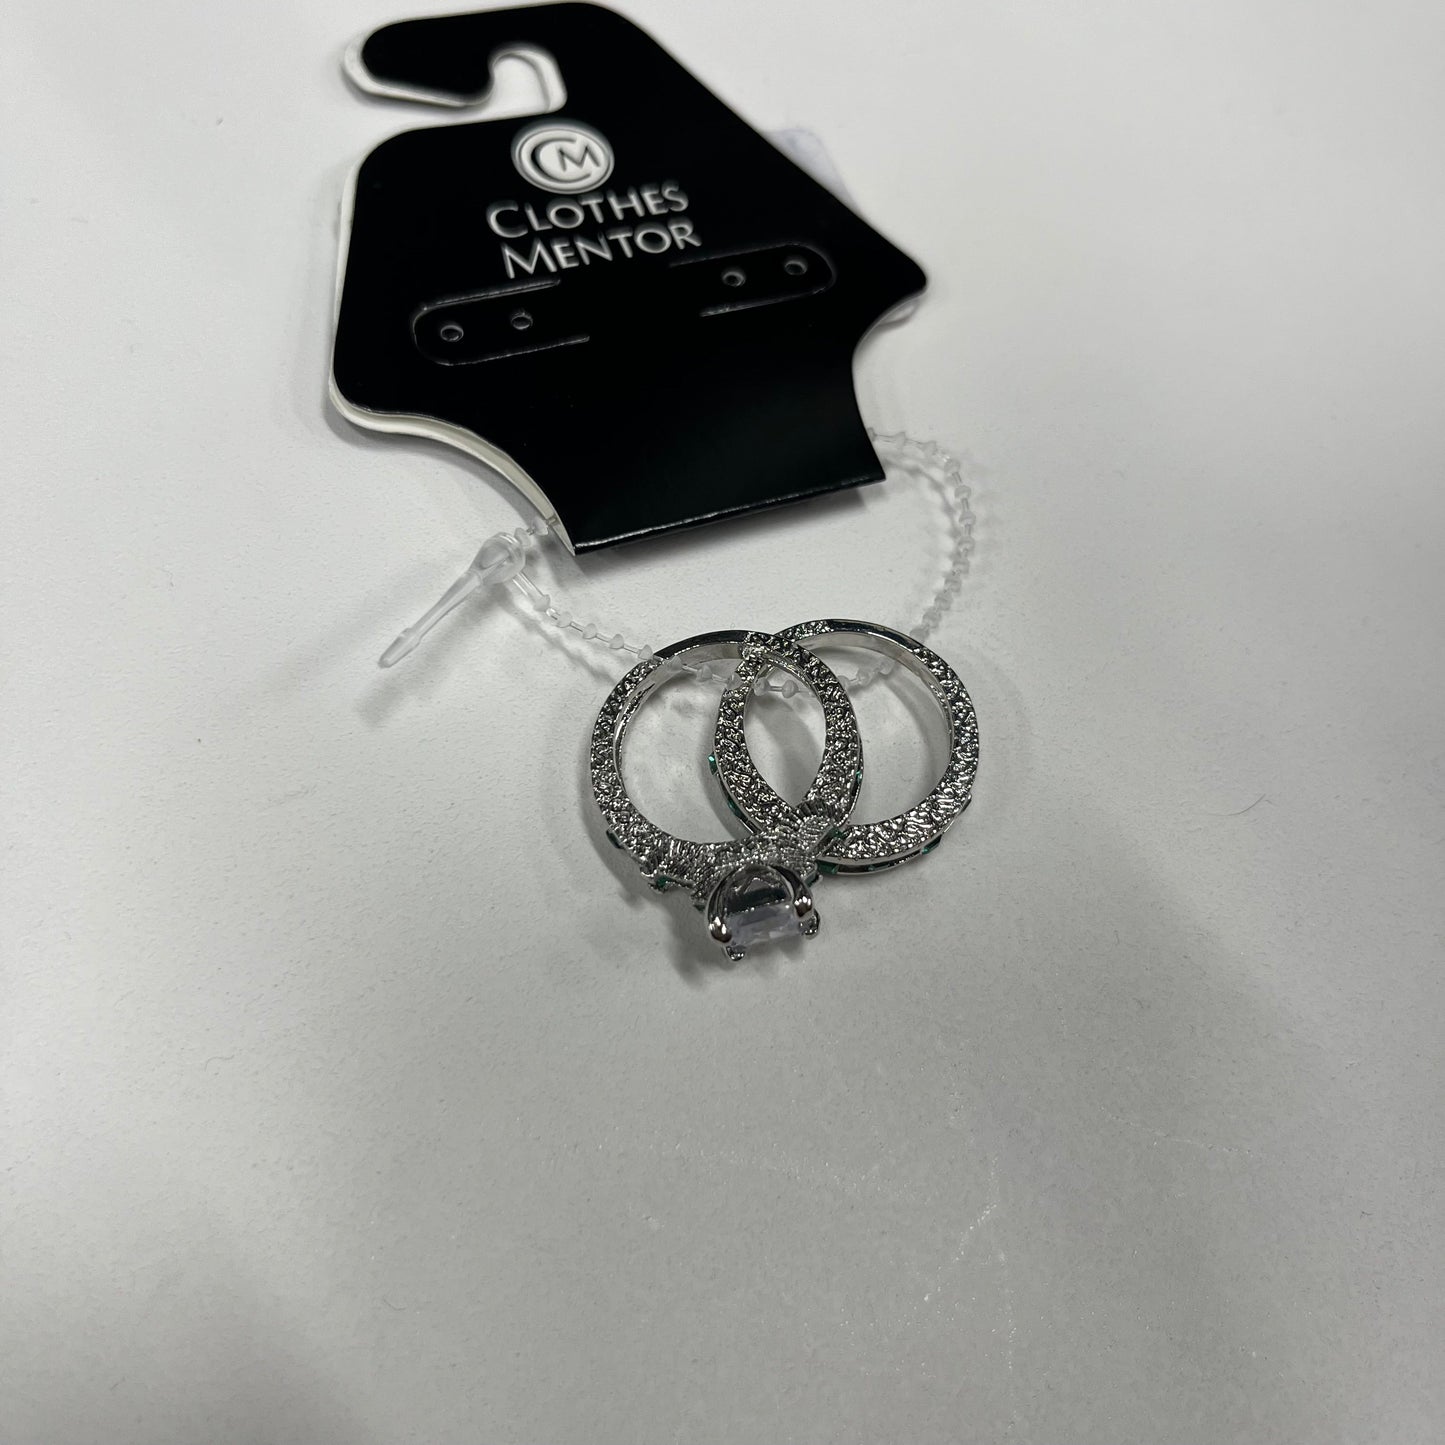 Ring Band By Clothes Mentor  Size: 02 Piece Set